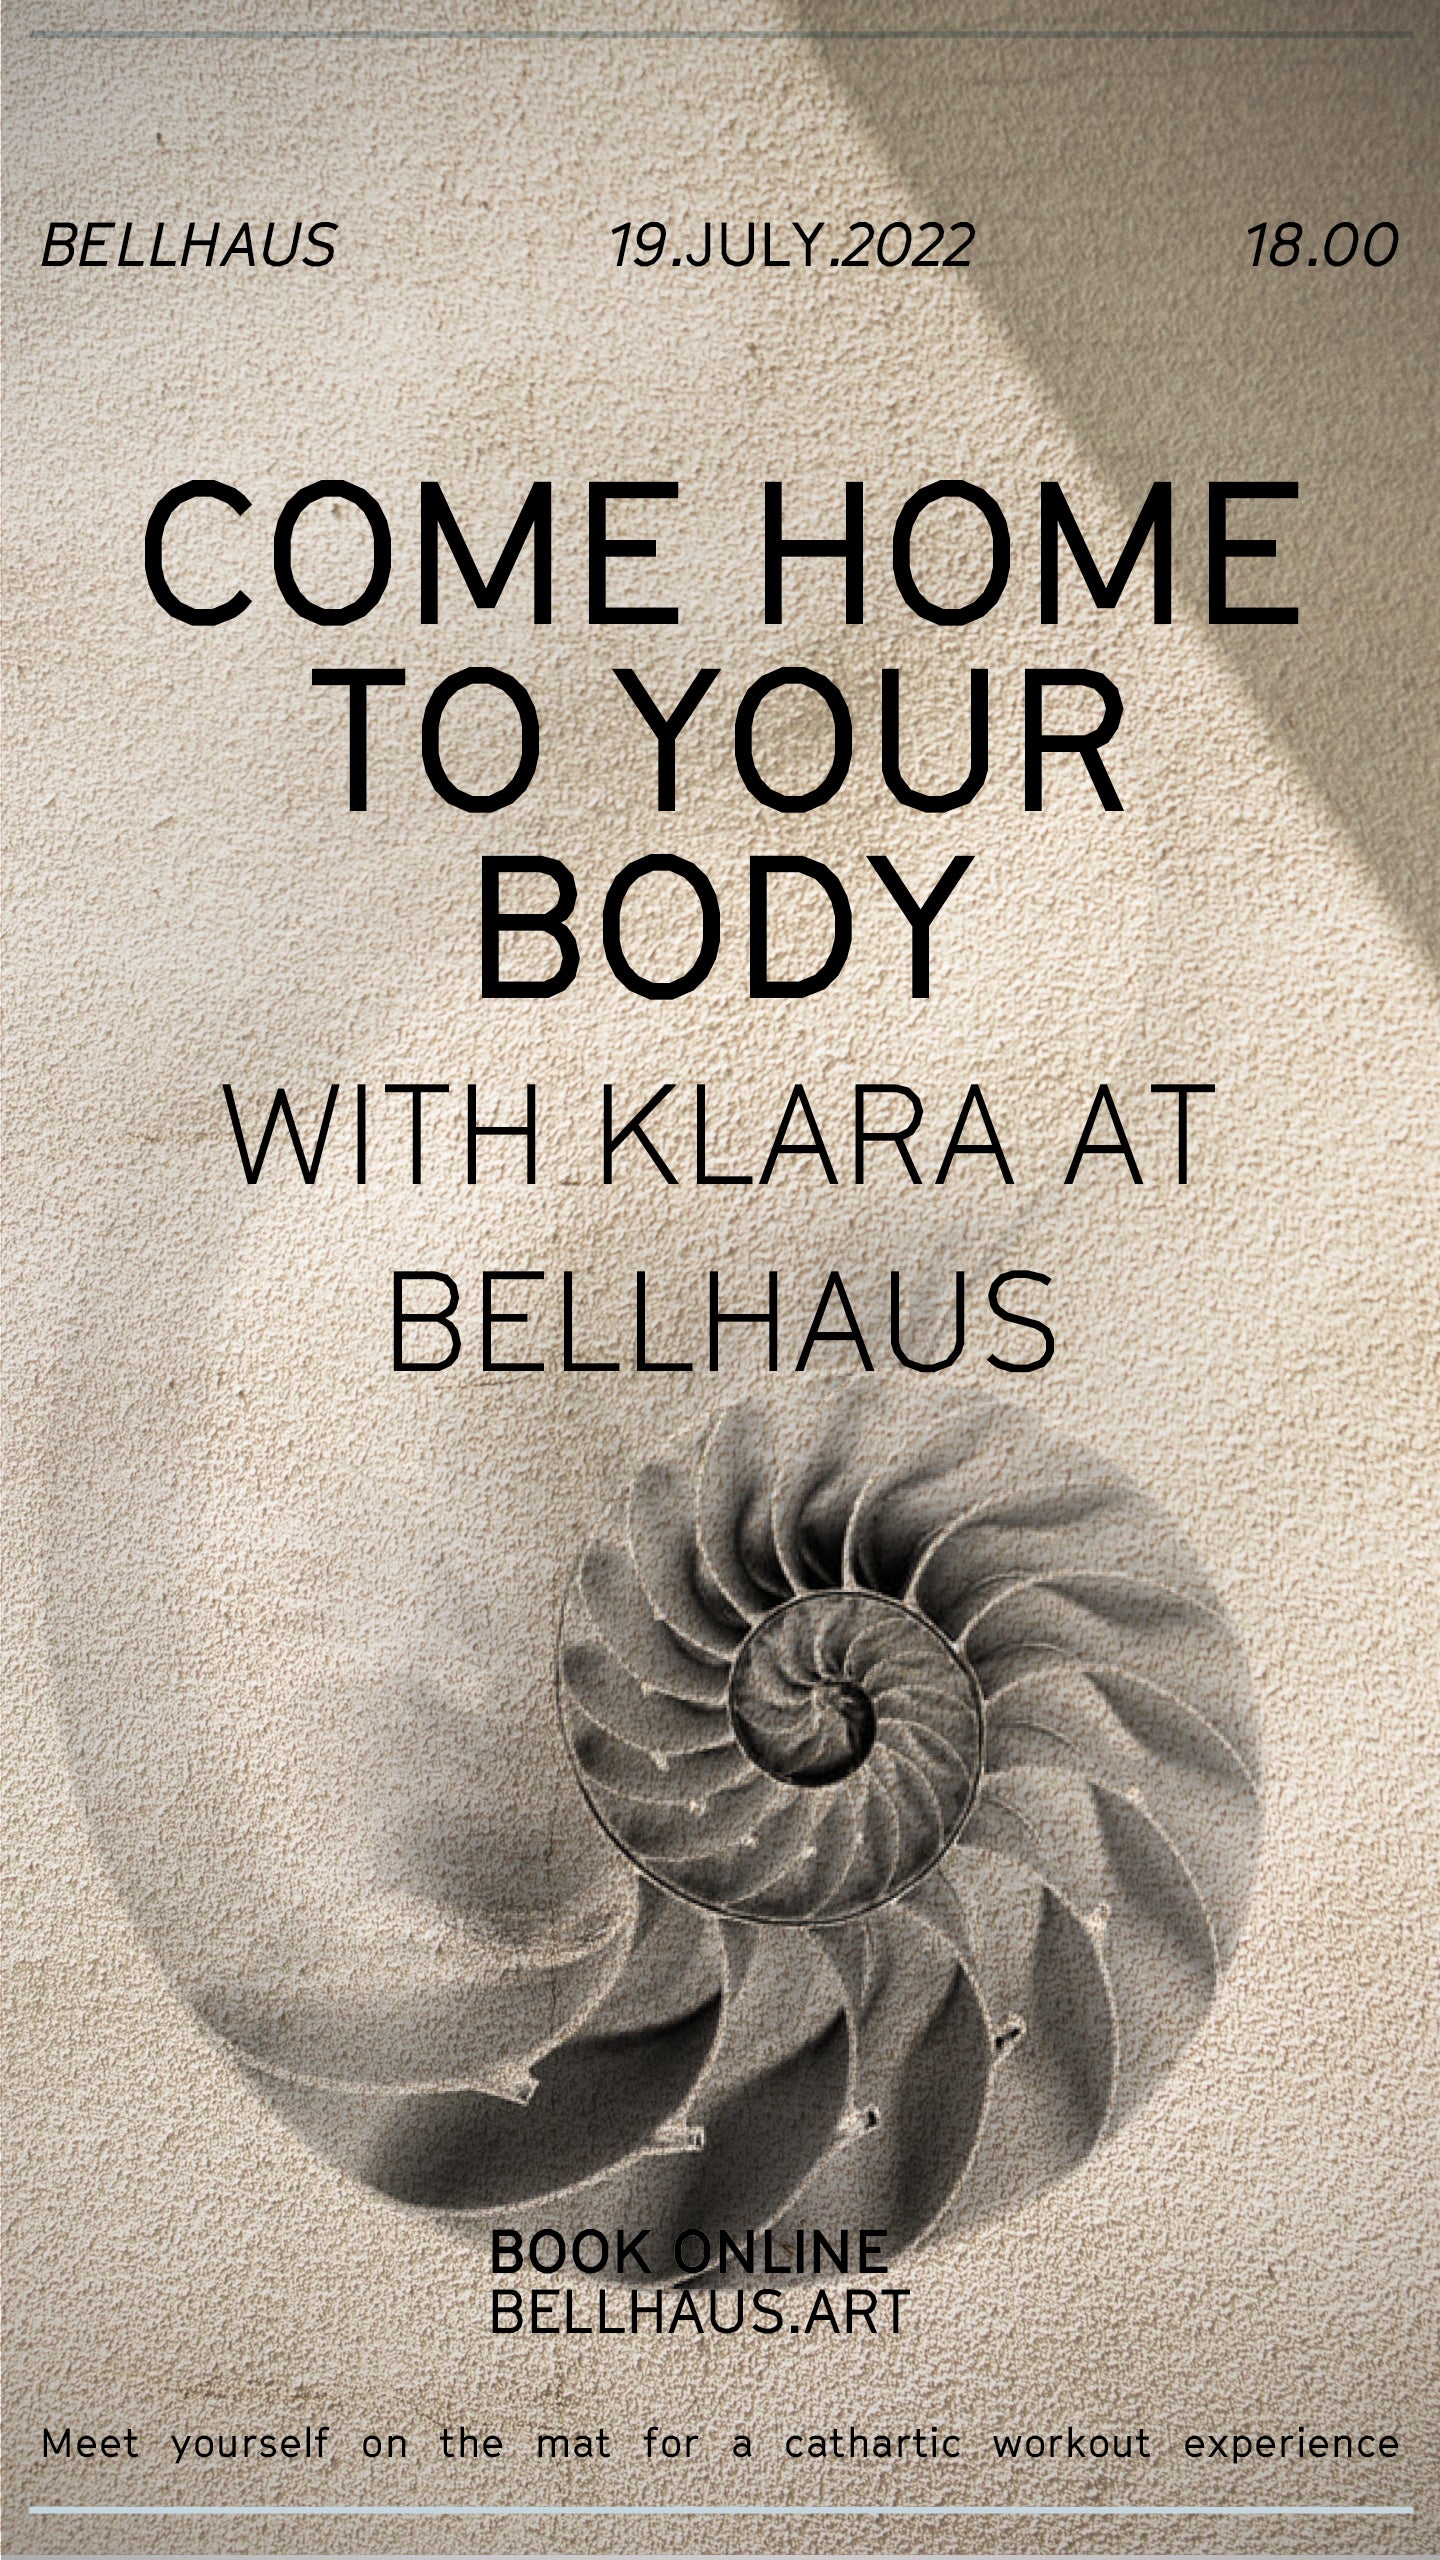 Come Home To Your Body - With Klara at Bellhaus